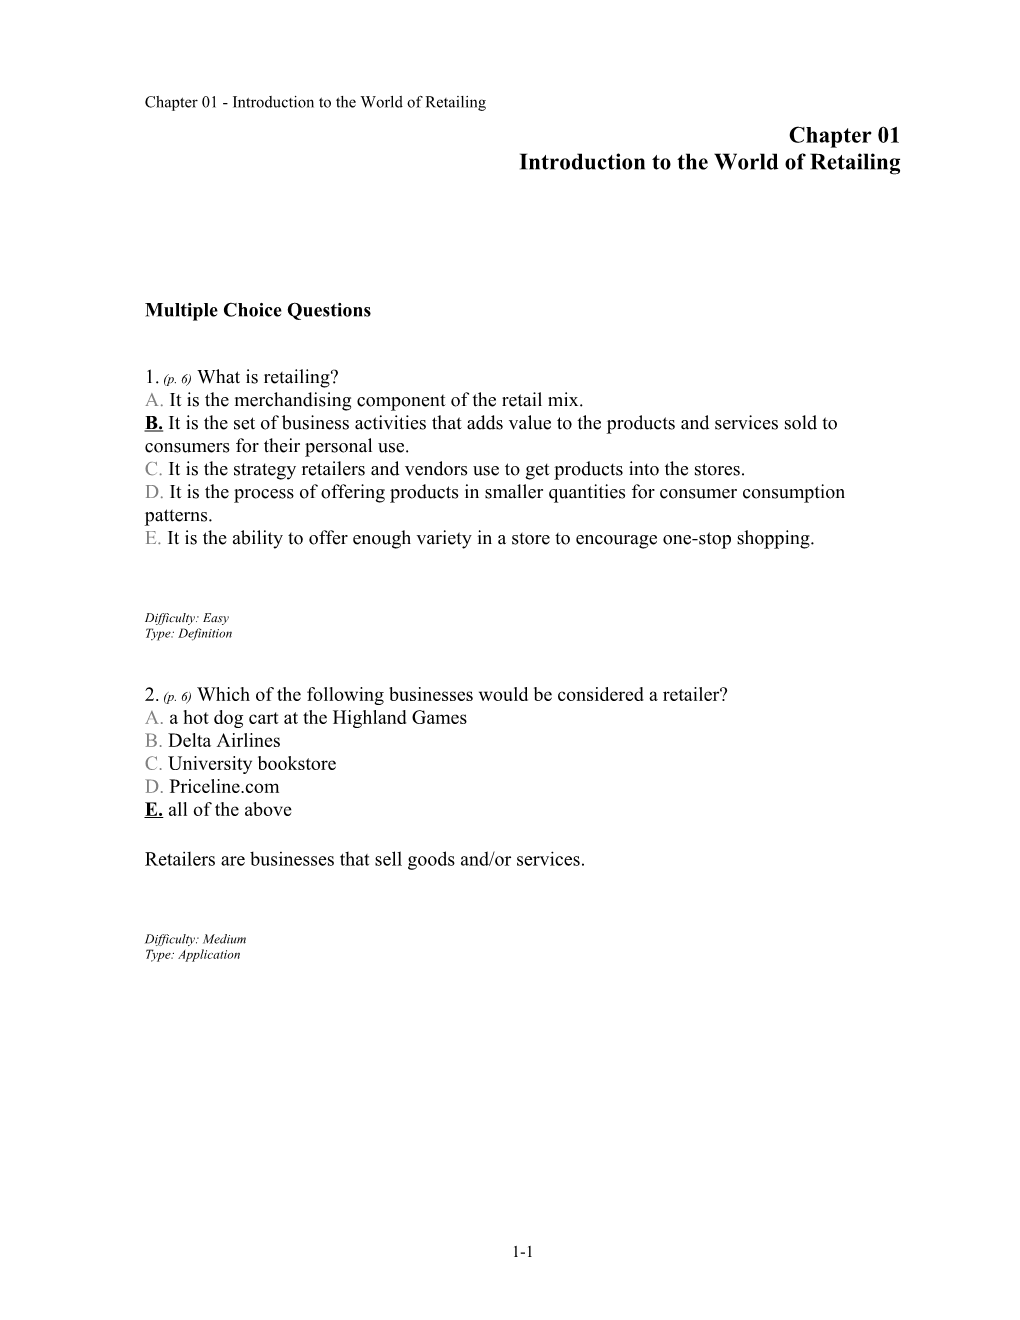 Chapter 01 Introduction to the World of Retailing